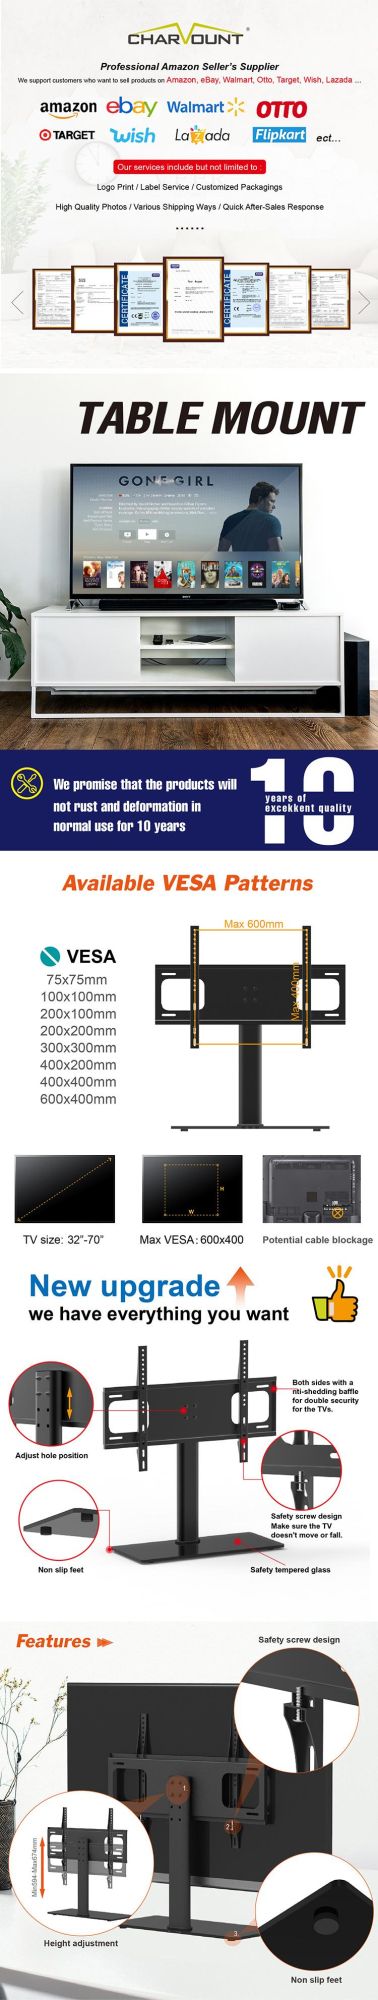 Wholesale Low Price High Quality Articulating LCD TV Bracket (CT-DVD-51B)